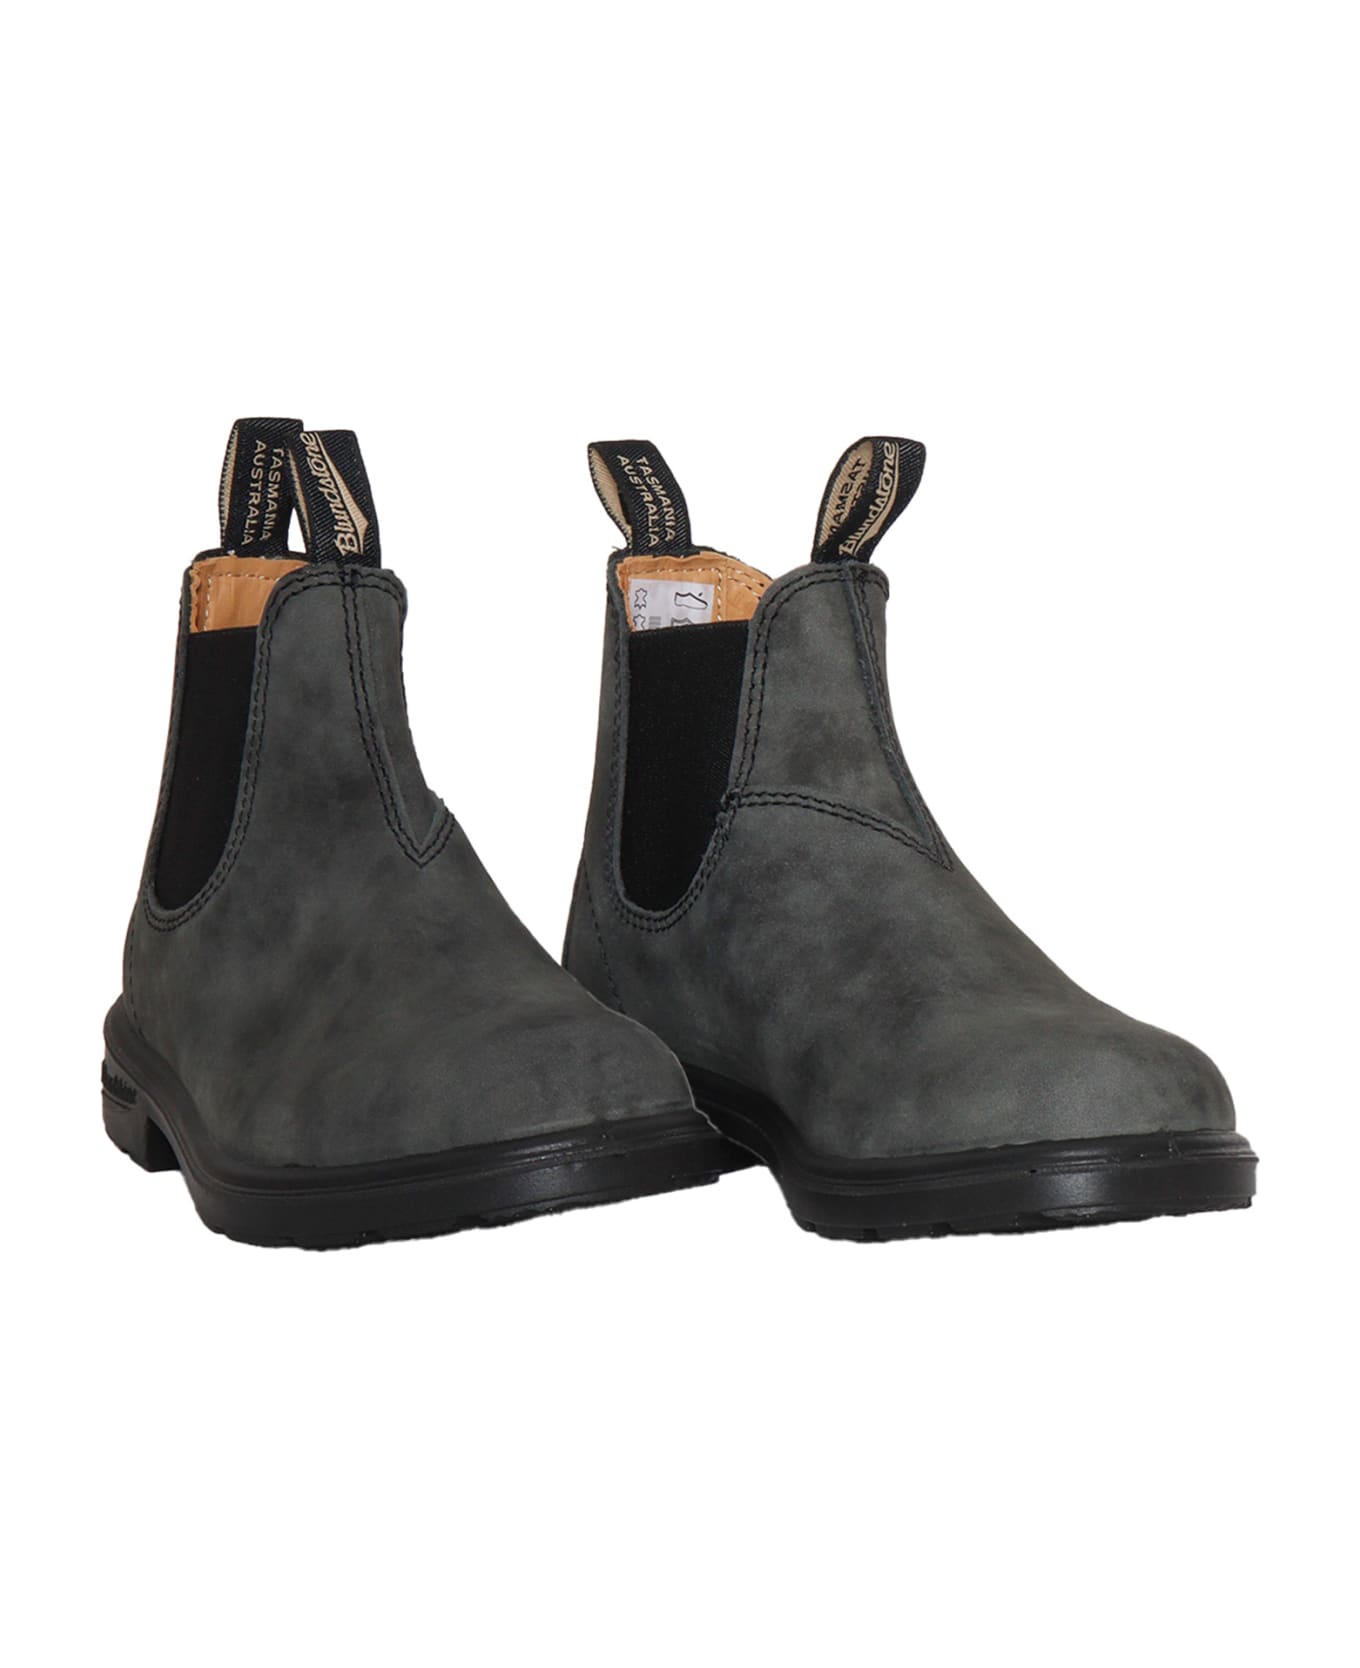 Blundstone Rustic Ankle Boot - BLACK